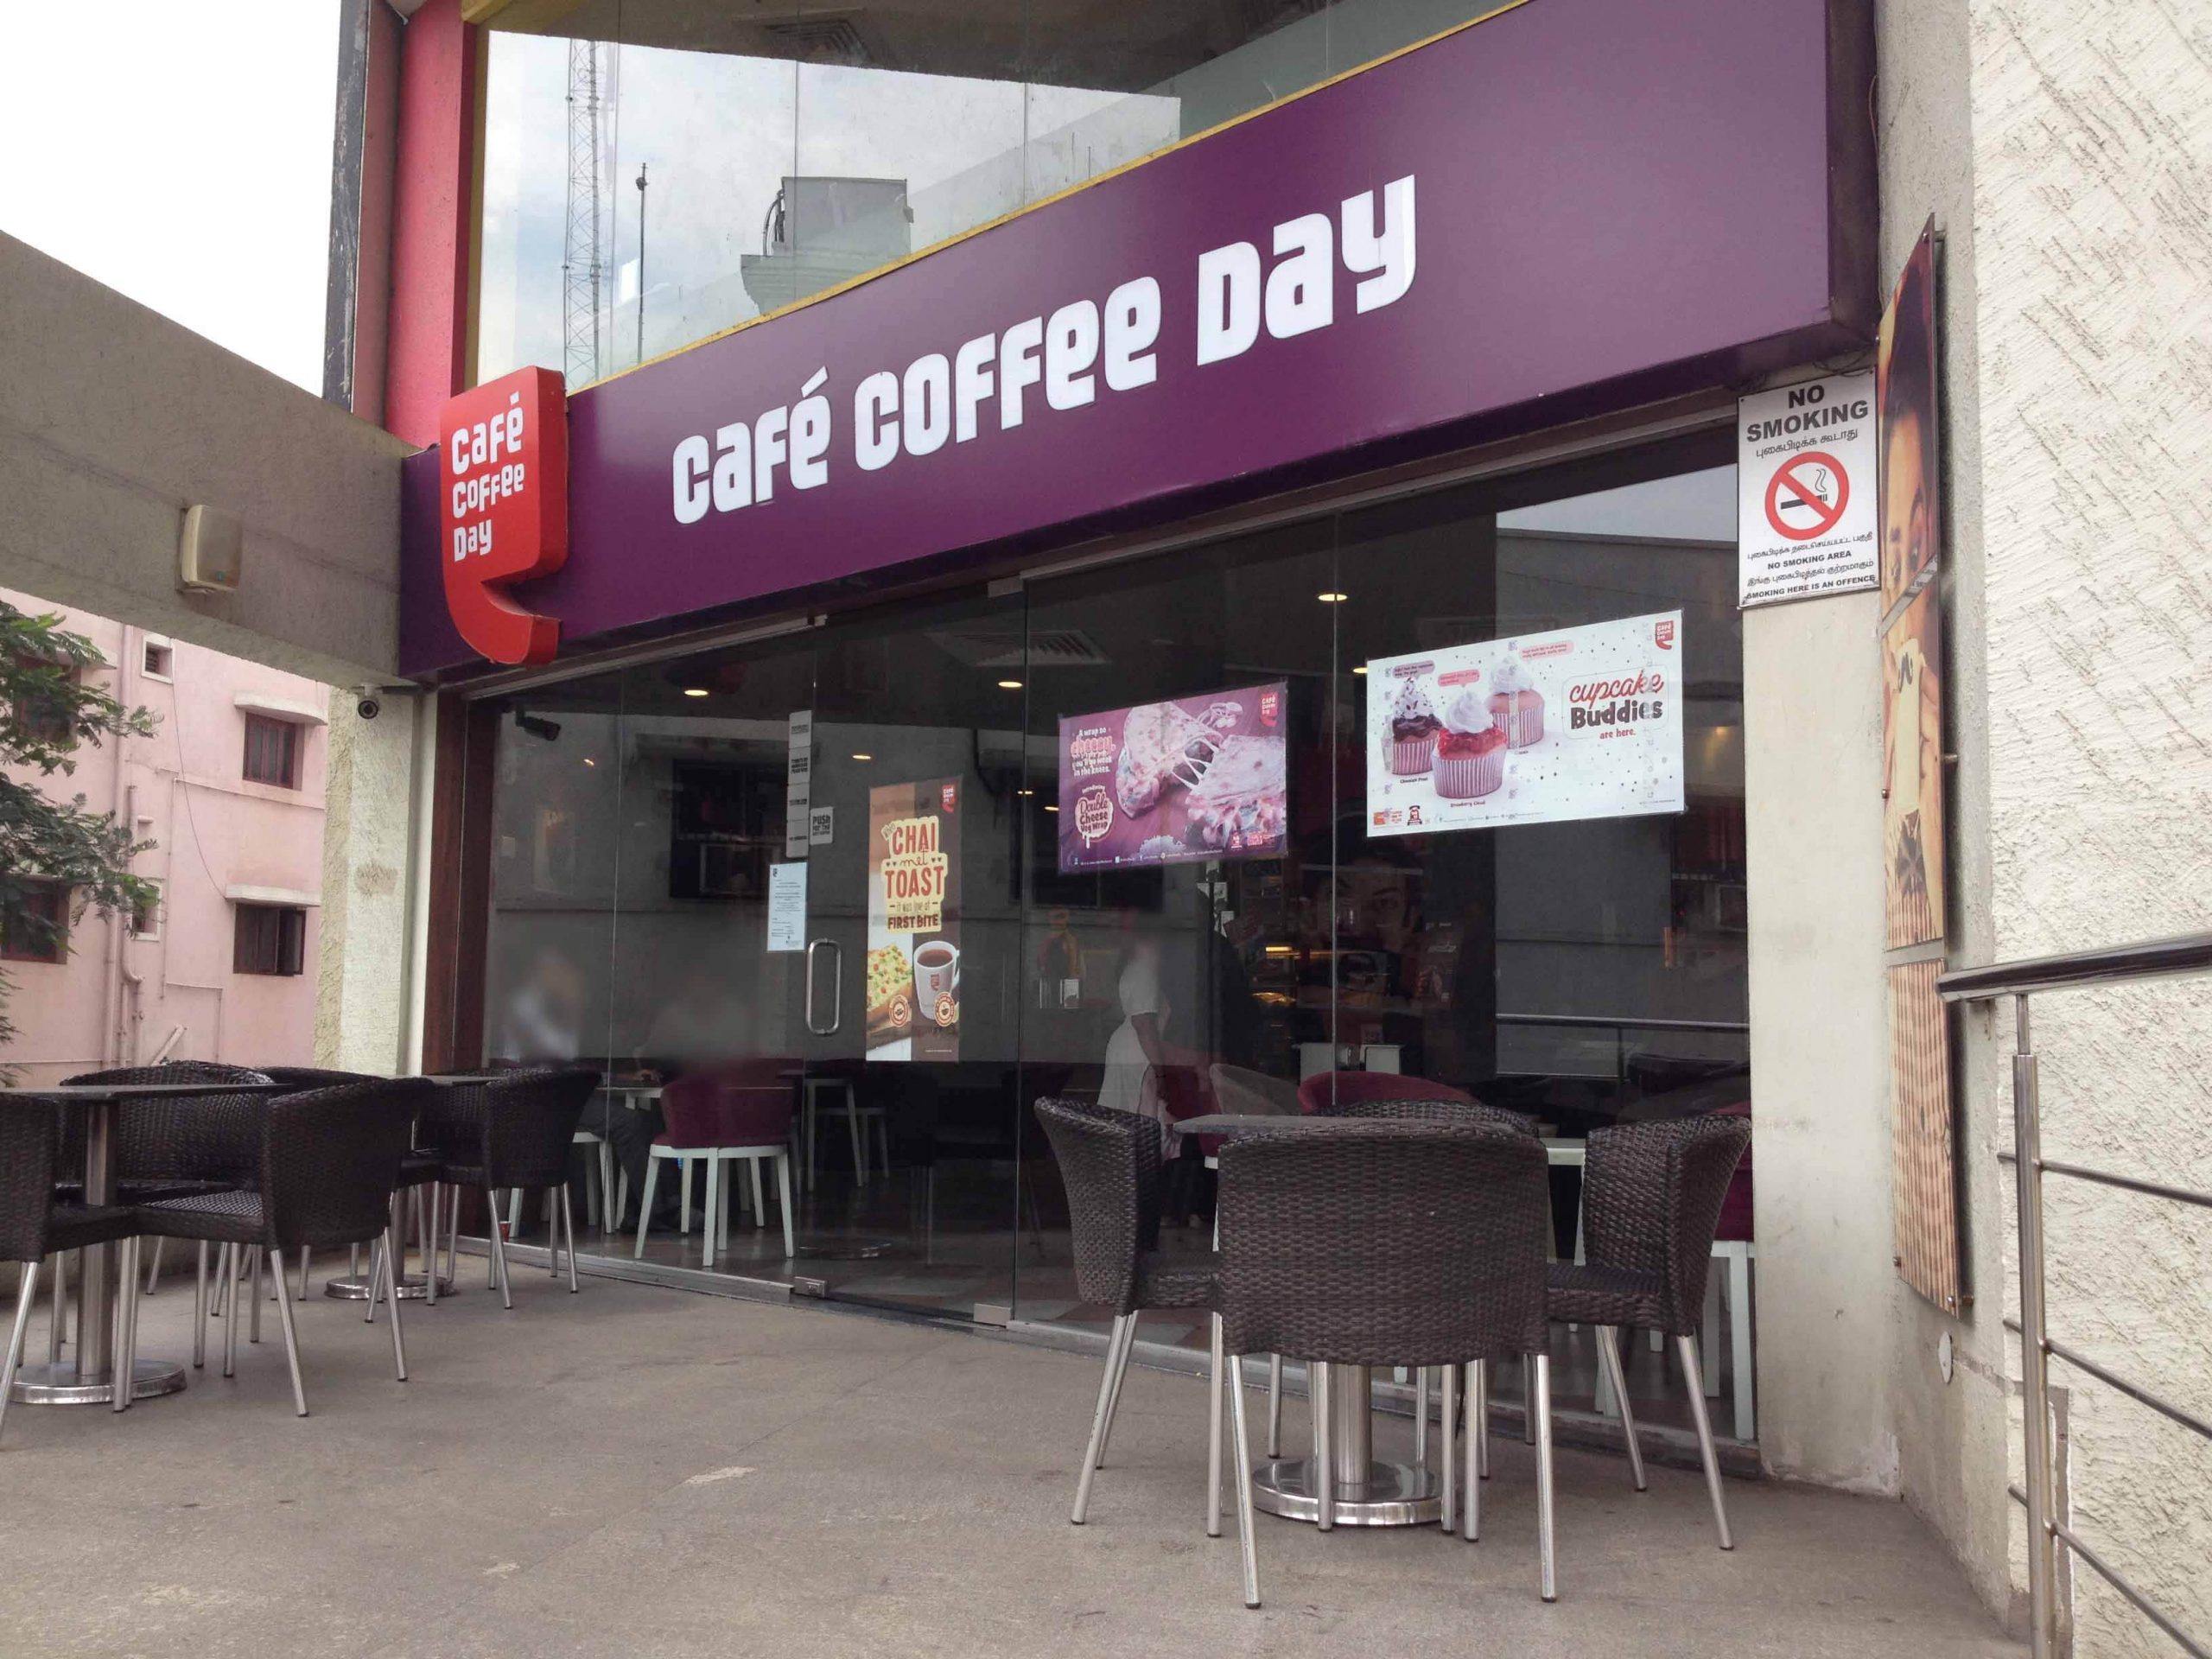 Tata's Plan To Buy Coffee Day's Vending Business Hits Hurdle - Equitypandit